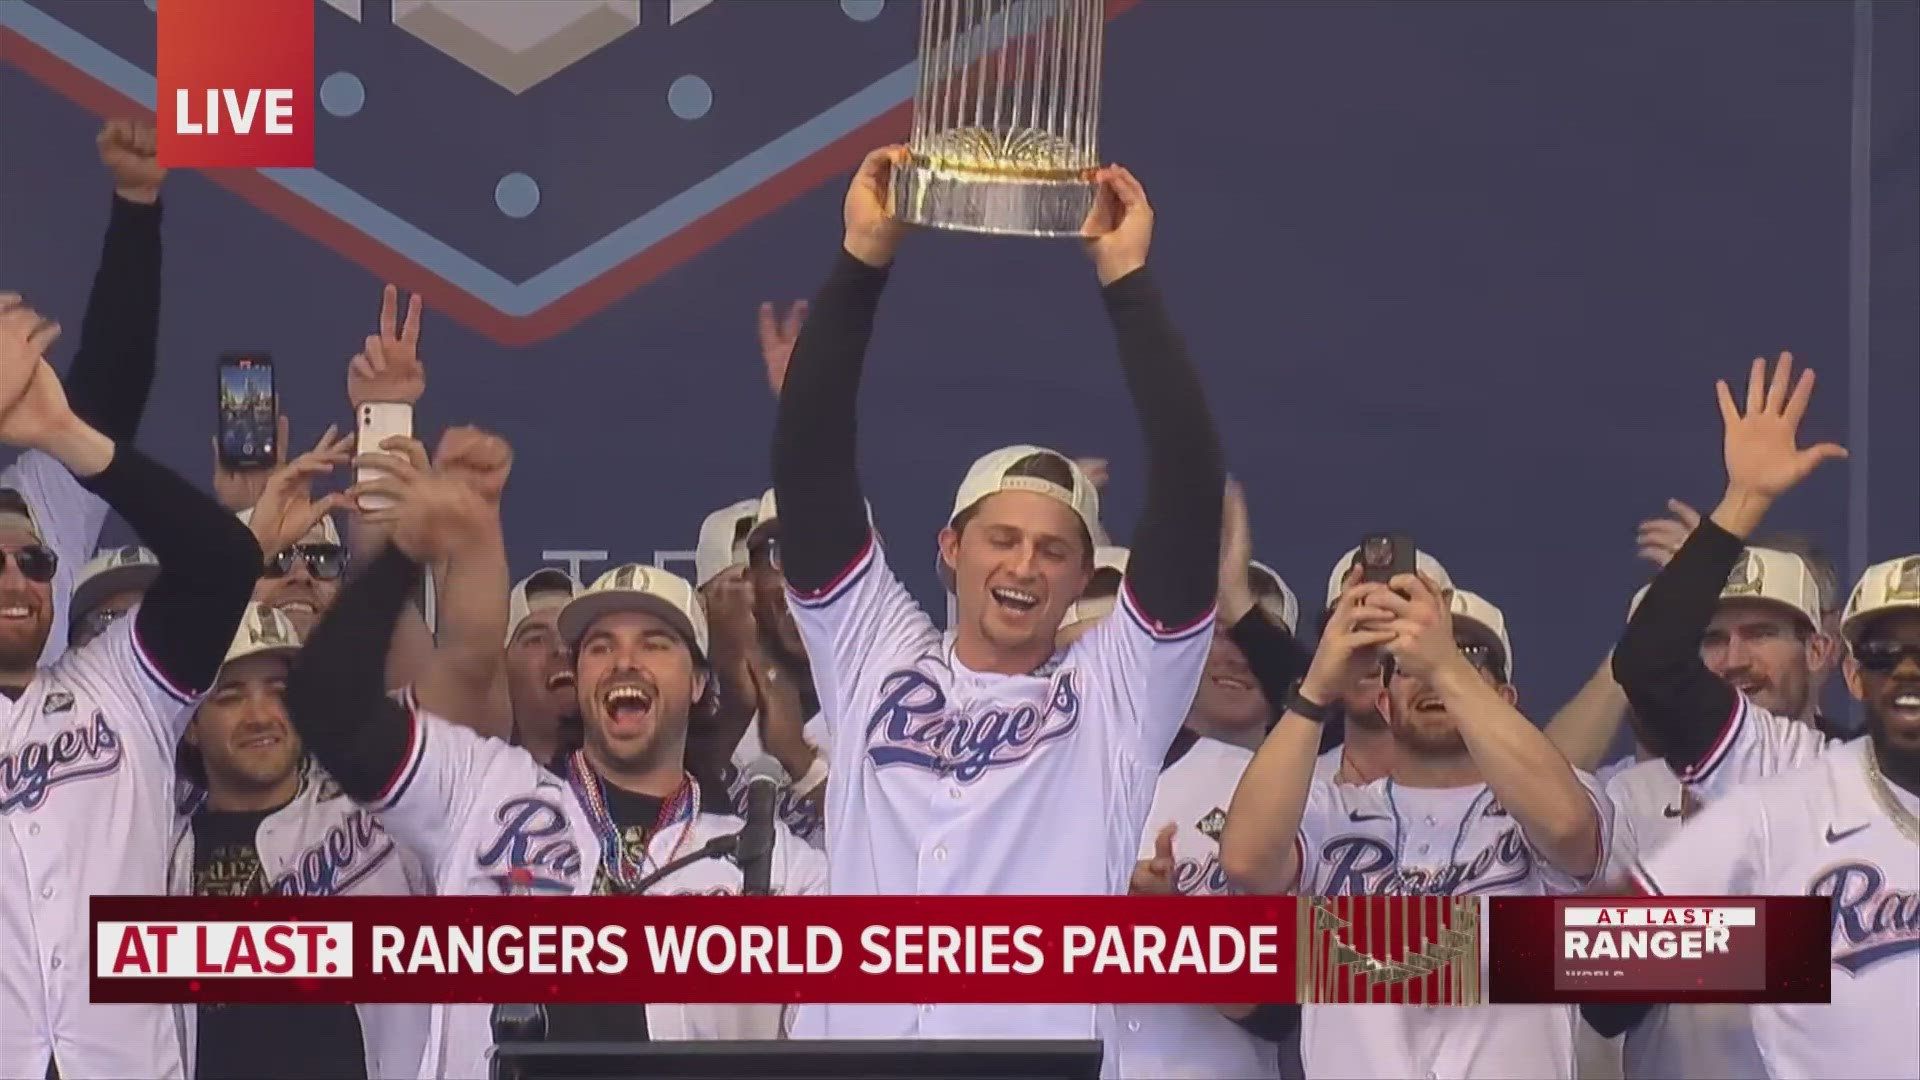 The Texas Rangers held up the World Series trophy at the team's championship parade in Arlington, Texas.